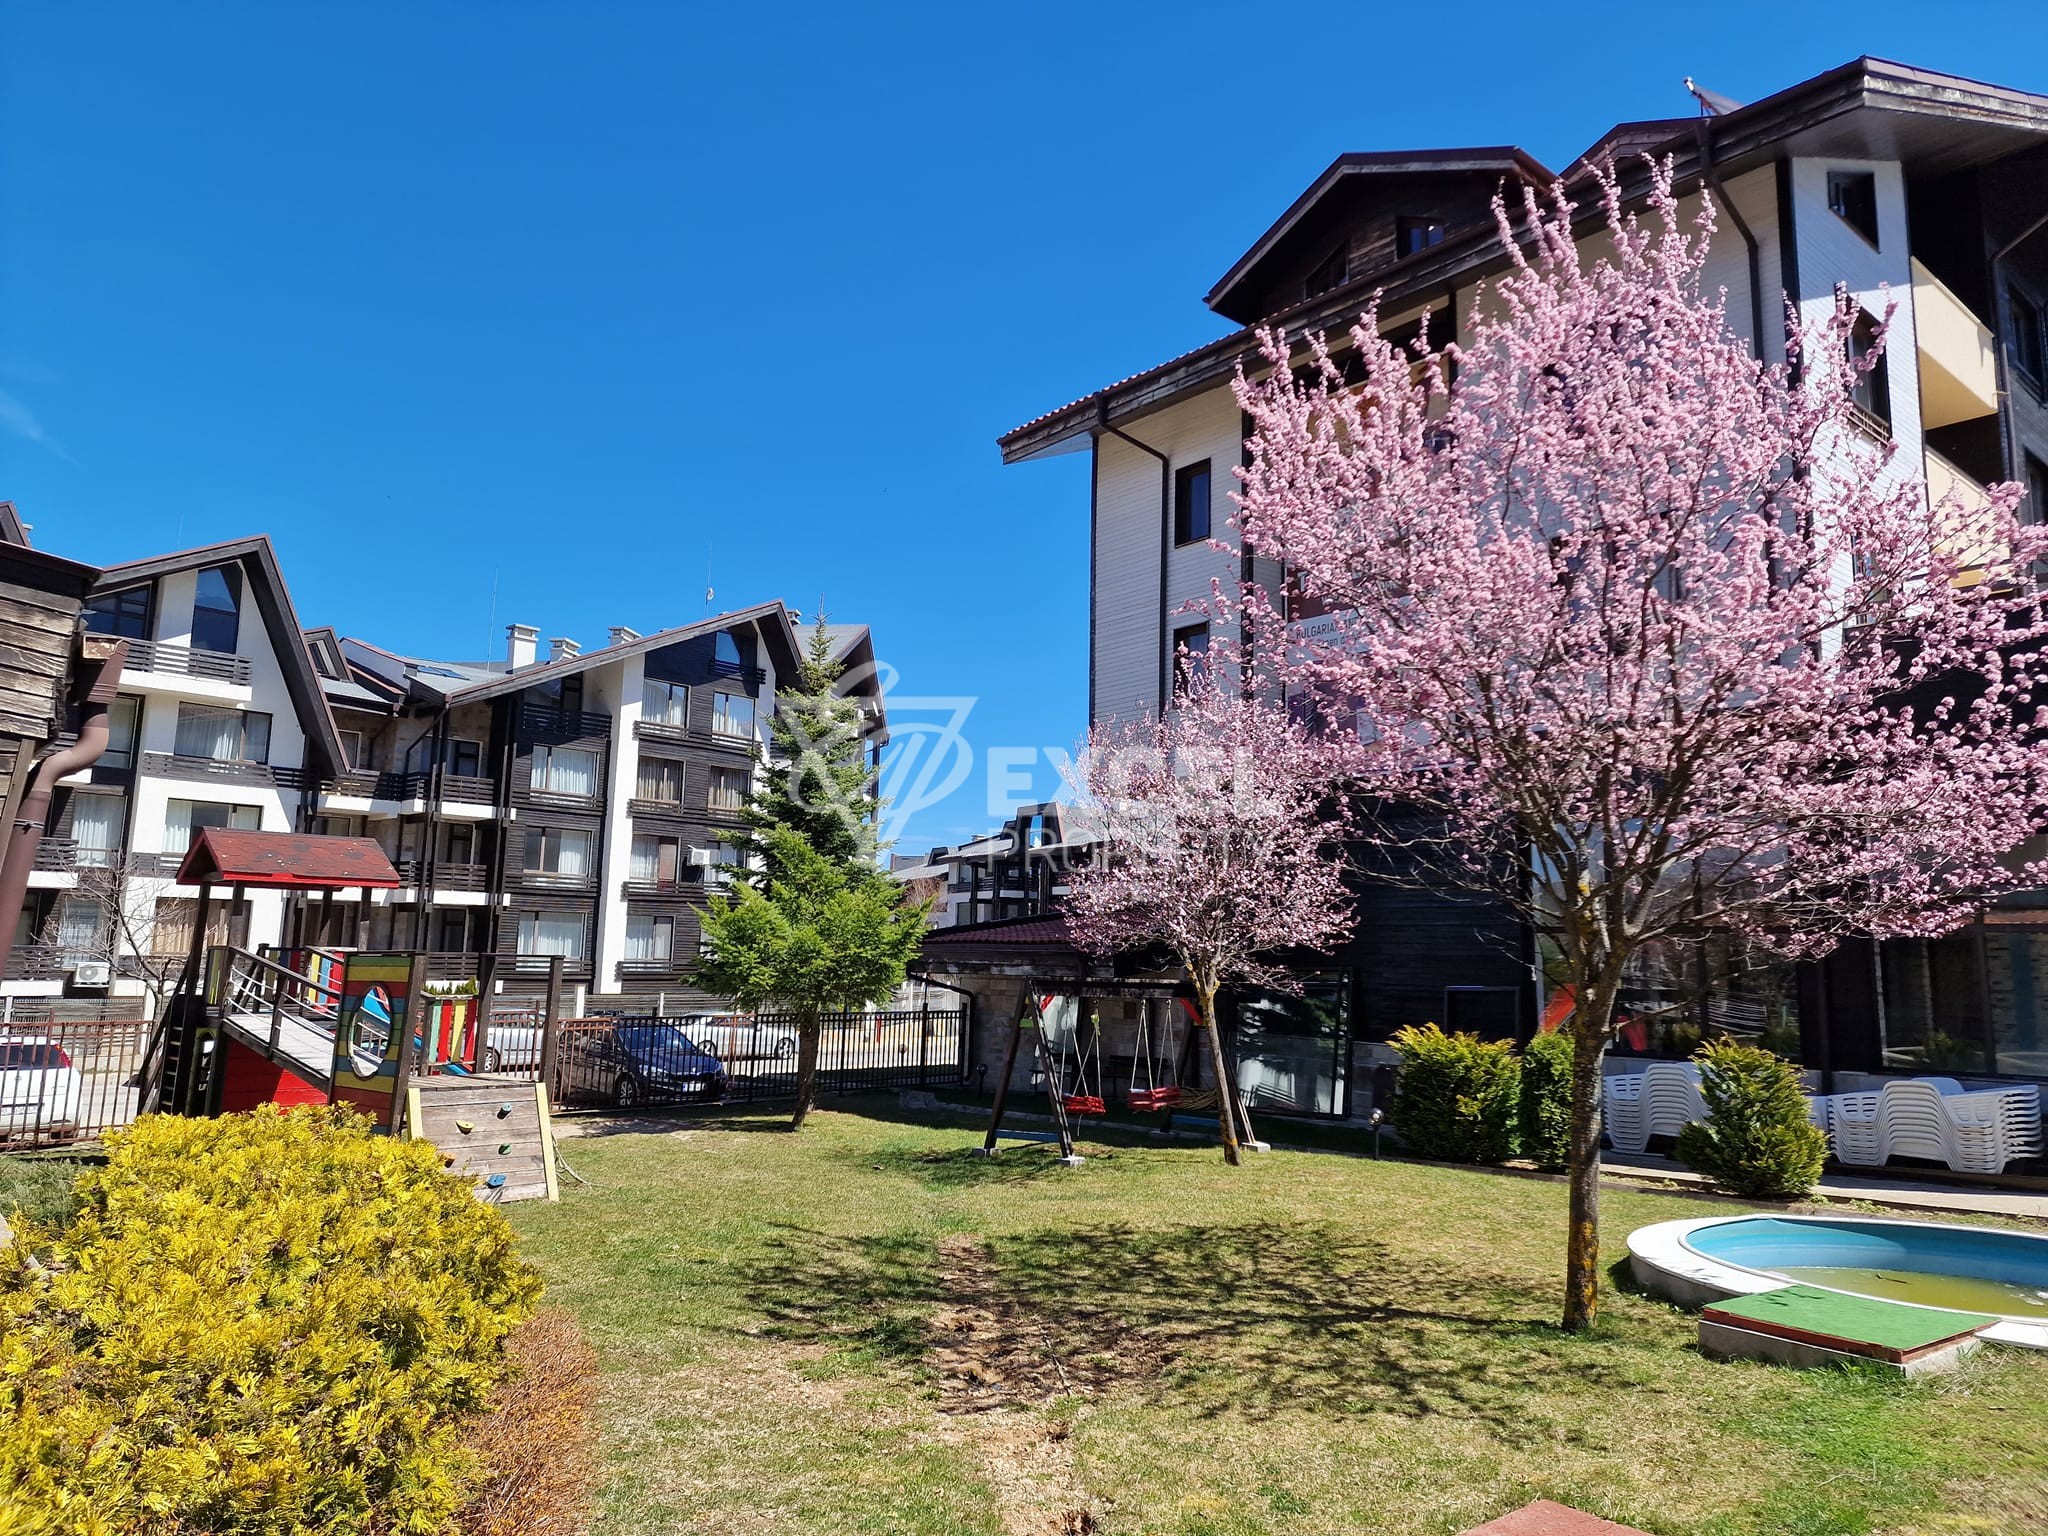 Two-bedroom apartment for sale in the Terra**** complex, next to Pirin Golf